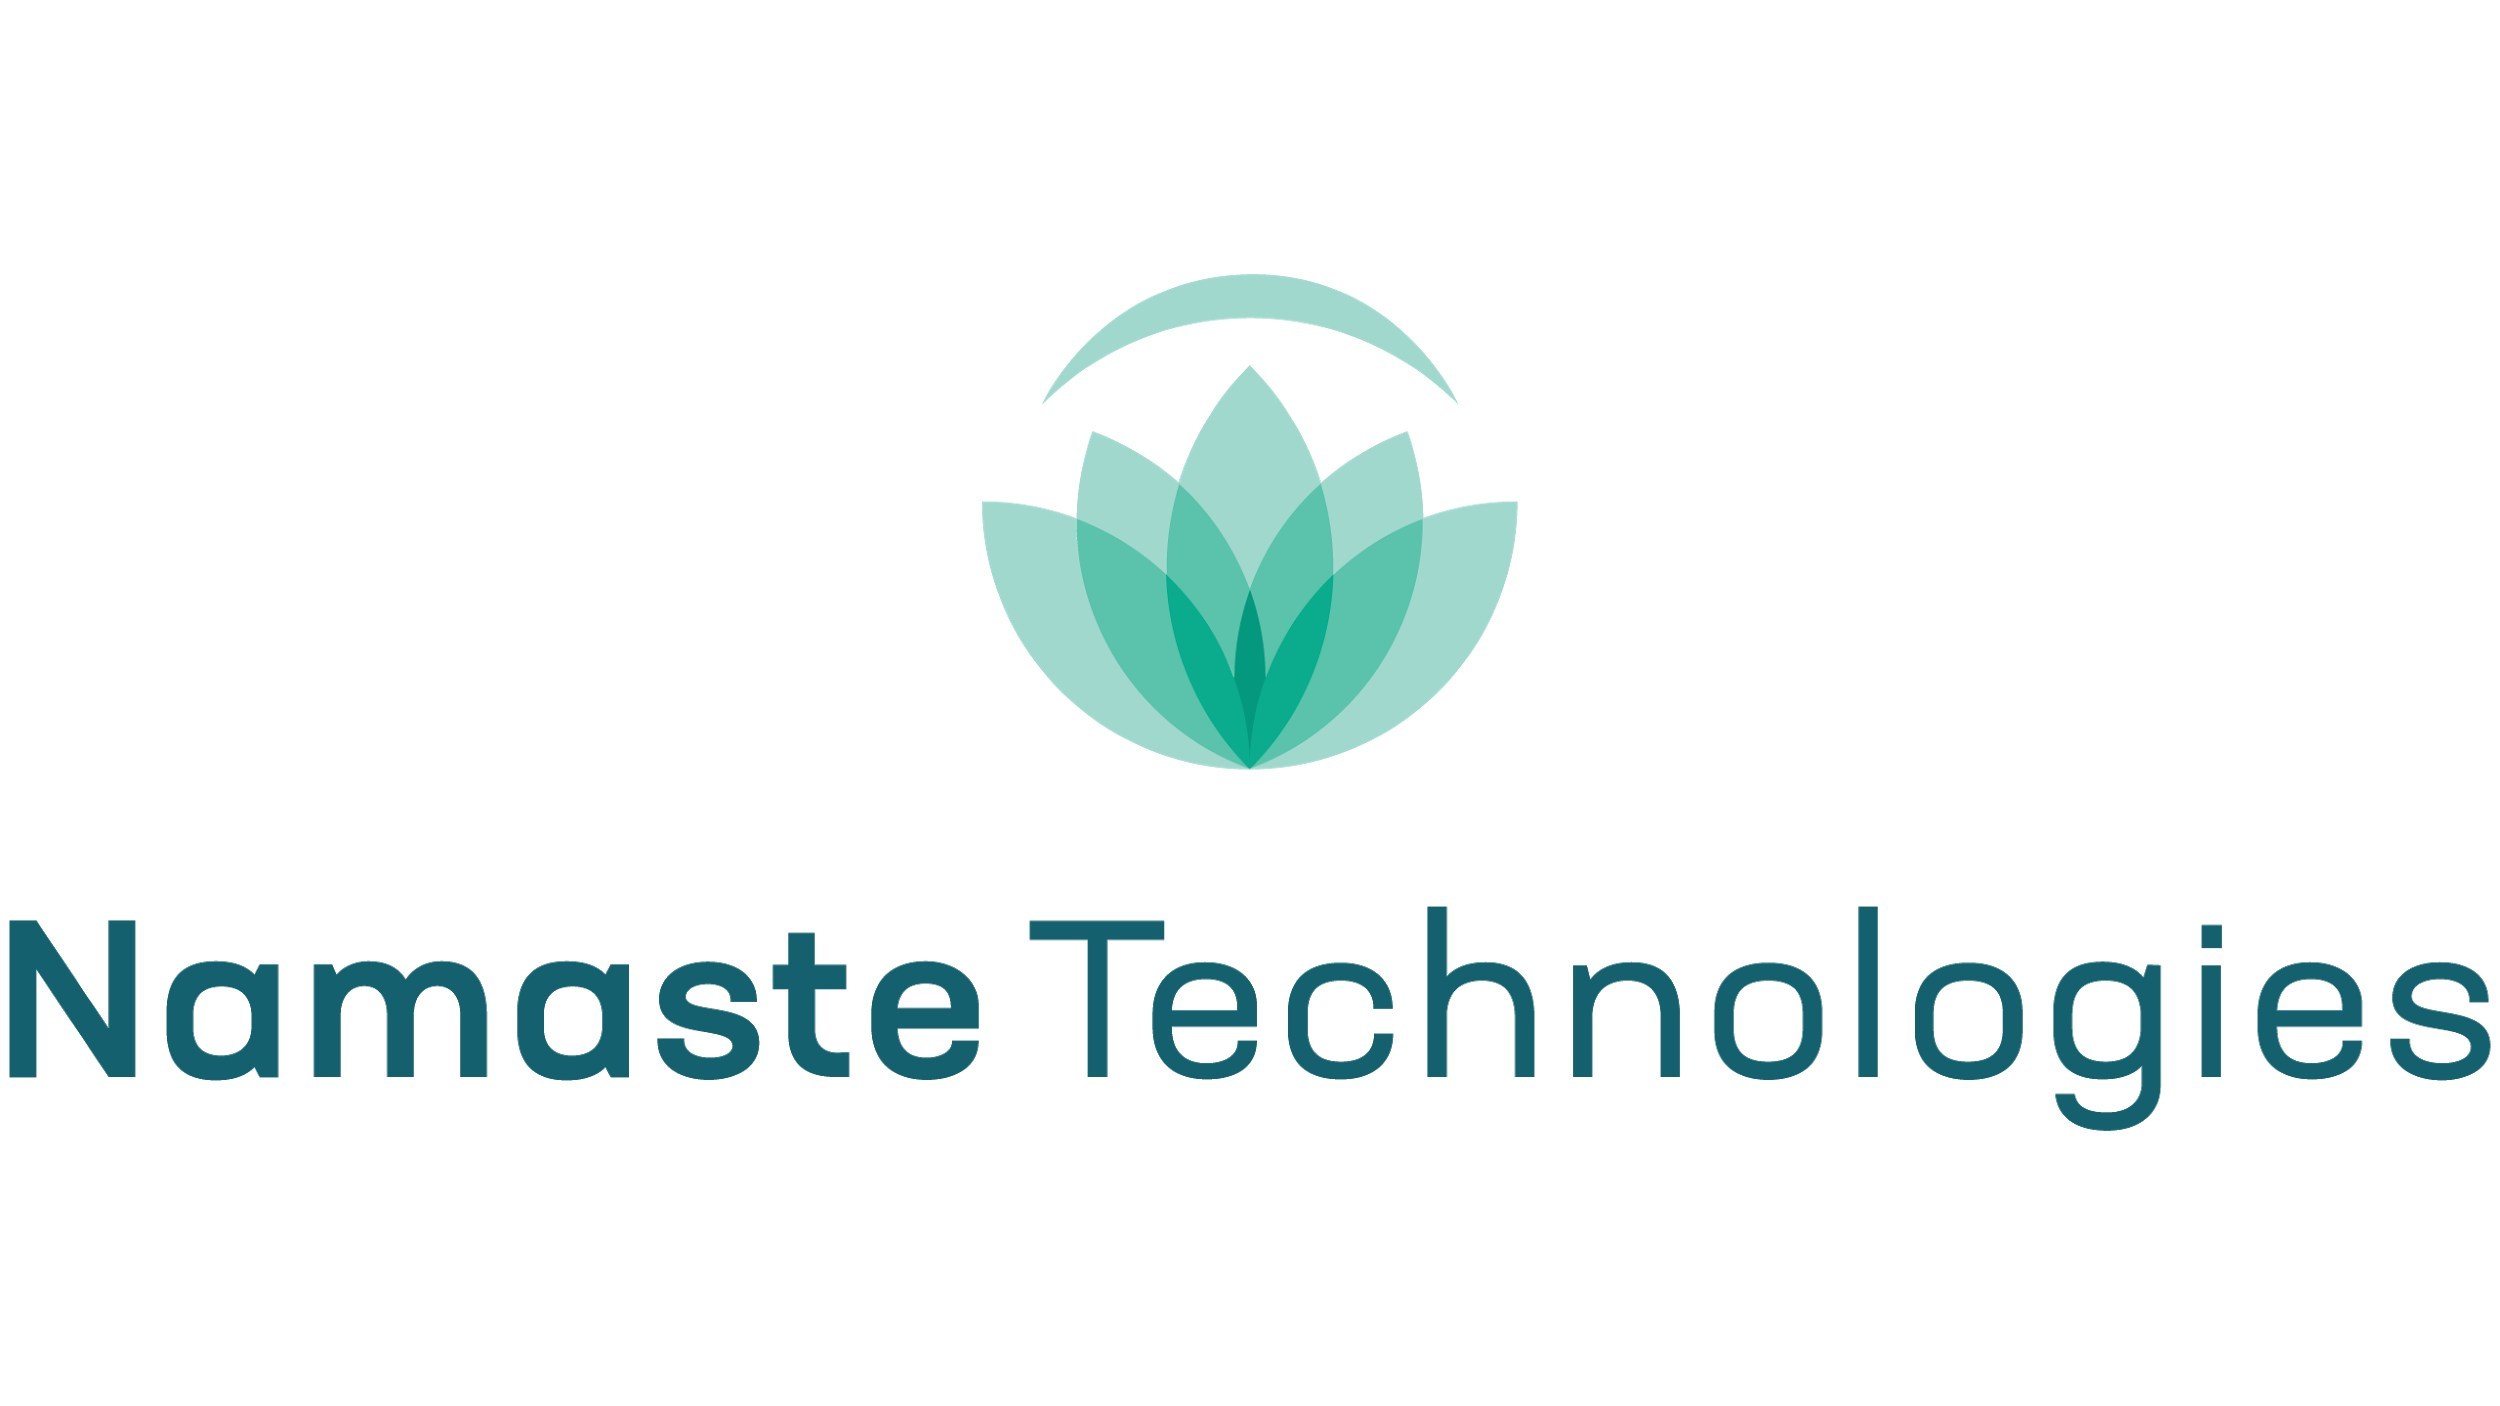 Namaste Technologies Reports Q3 2019 Financial Results